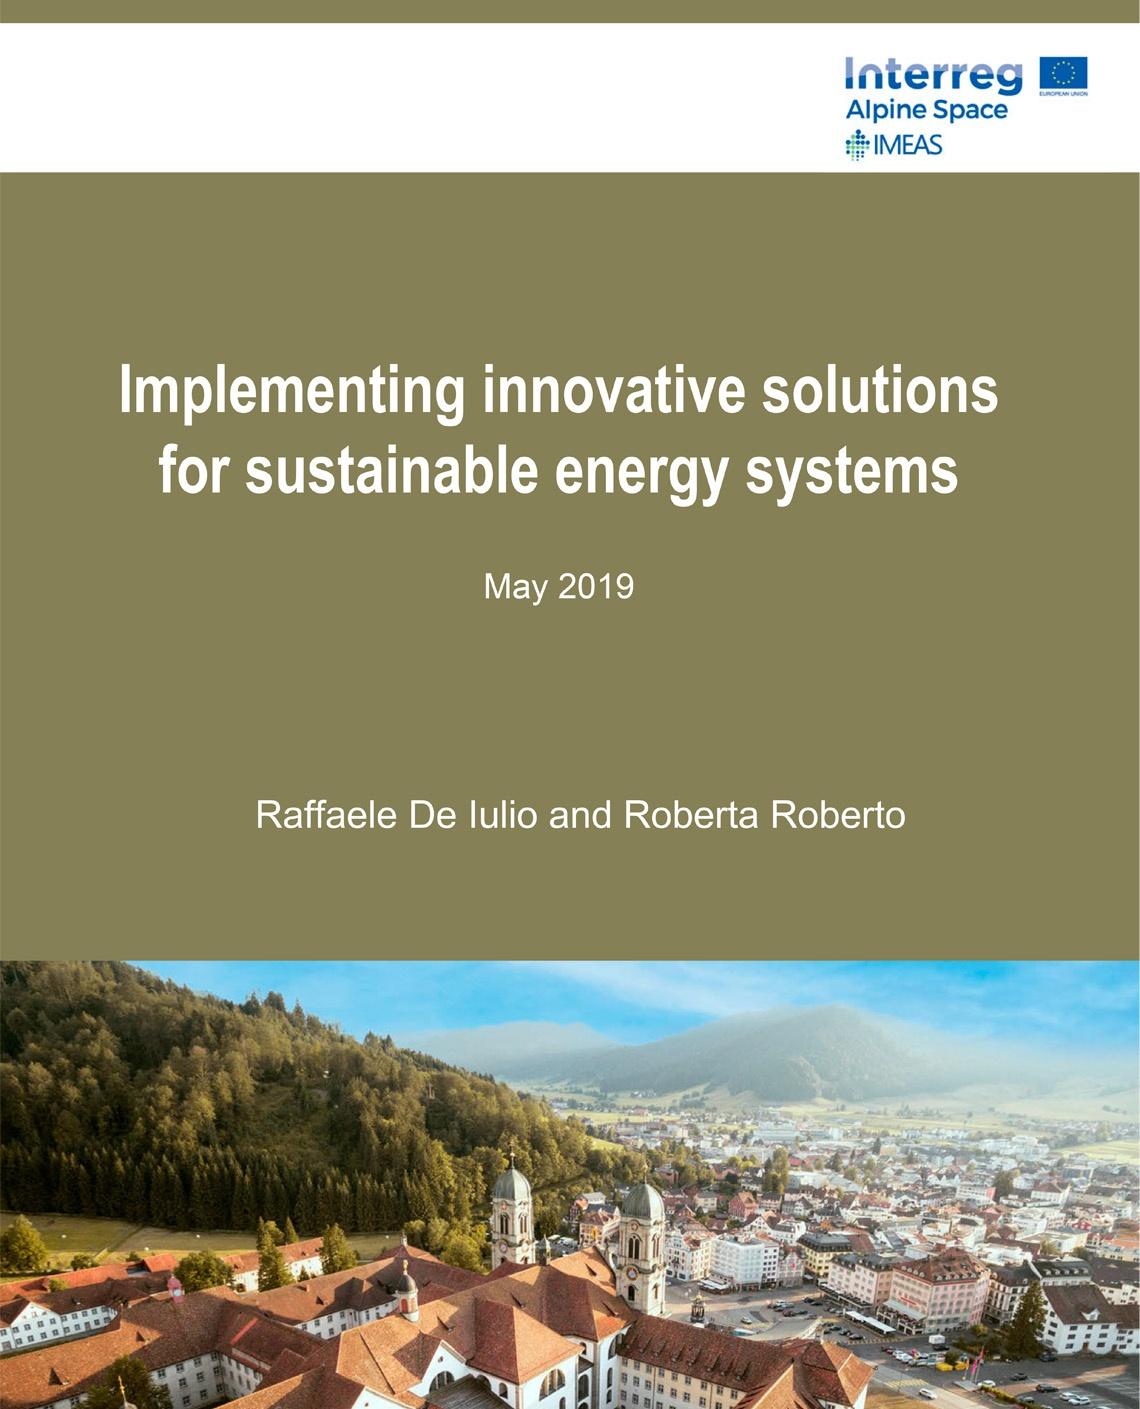 Implementing innovative solutions for sustainable energy systems